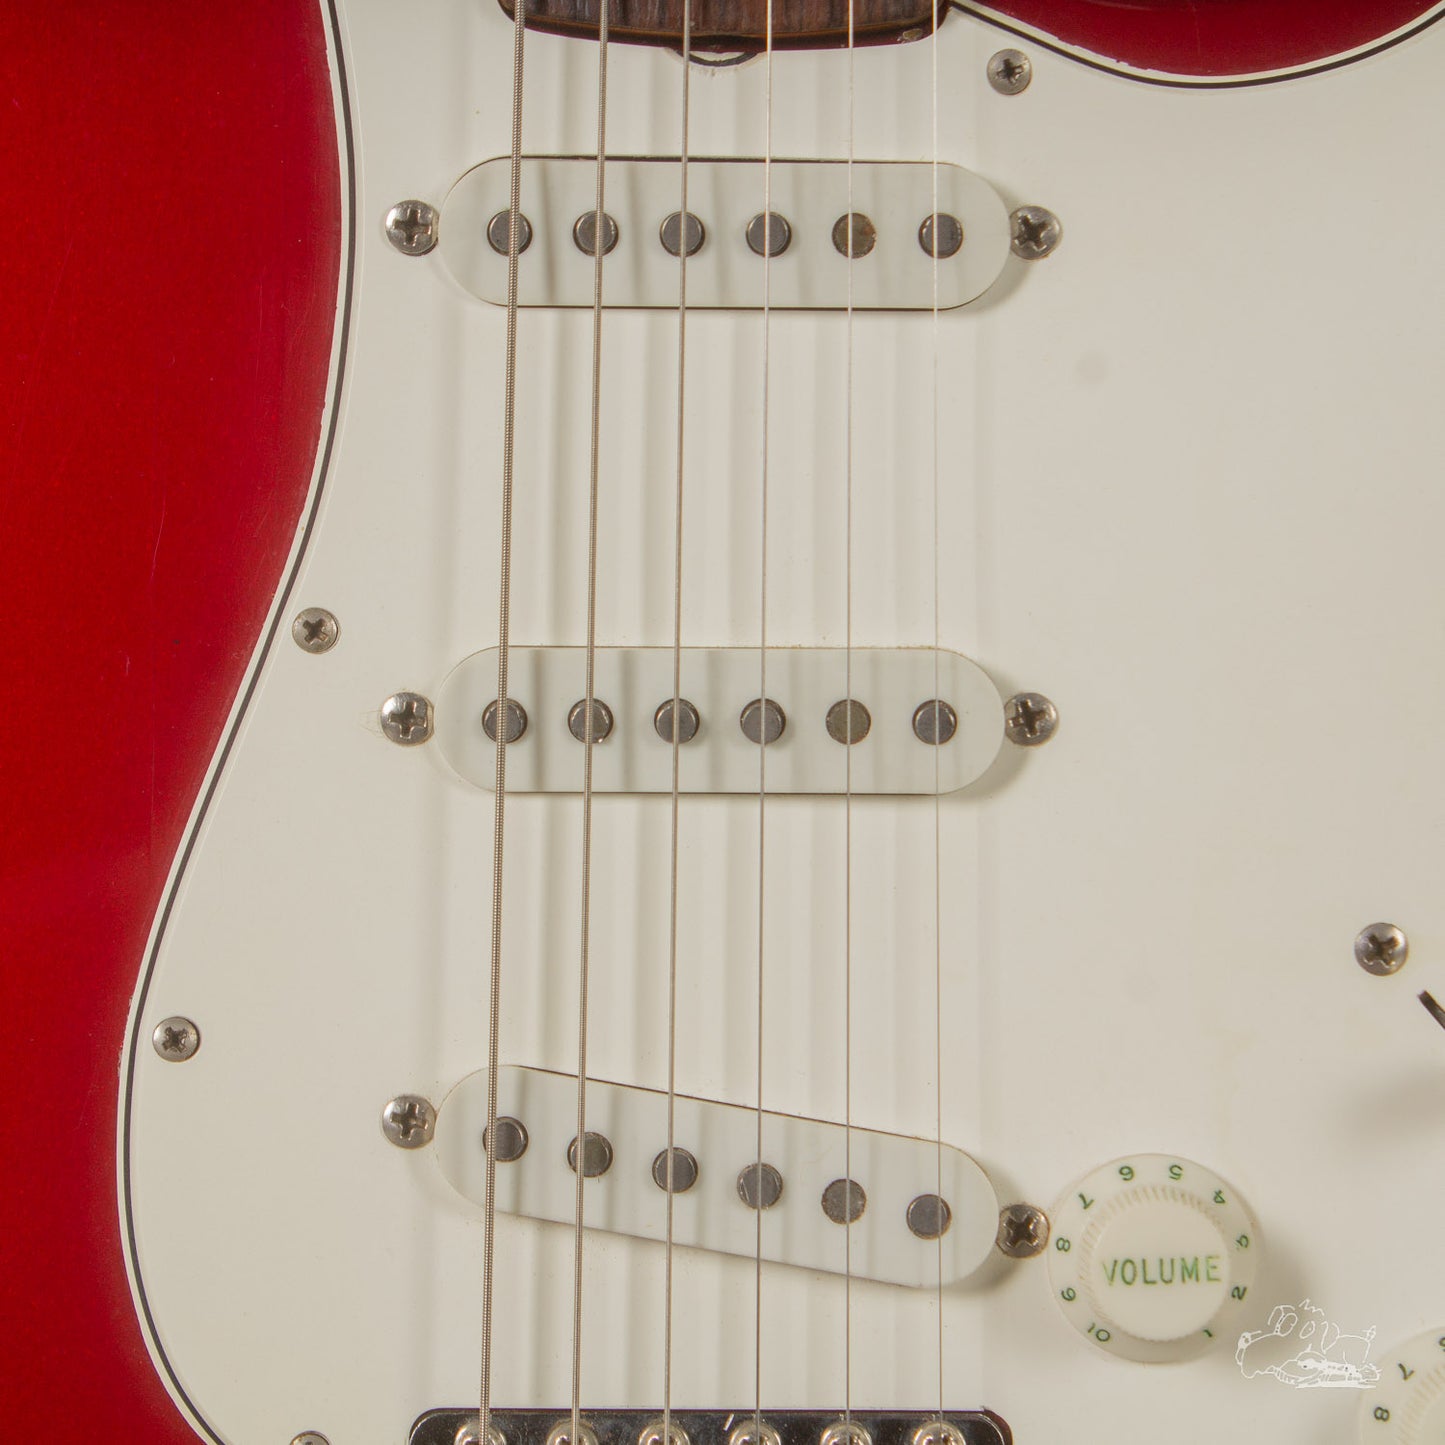 1966 Fender Stratocaster - Candy Apple Red